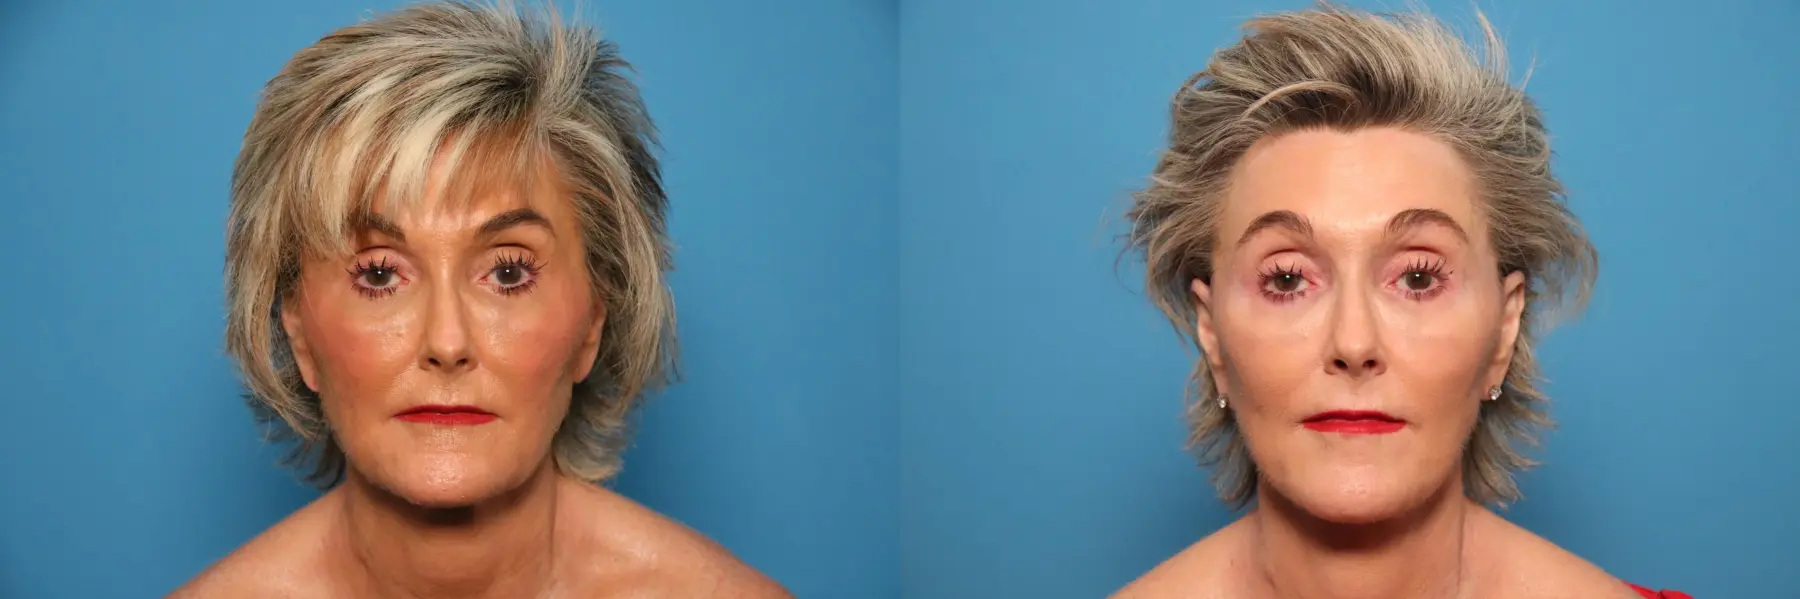 Mini Facelift: Patient 6 - Before and After  